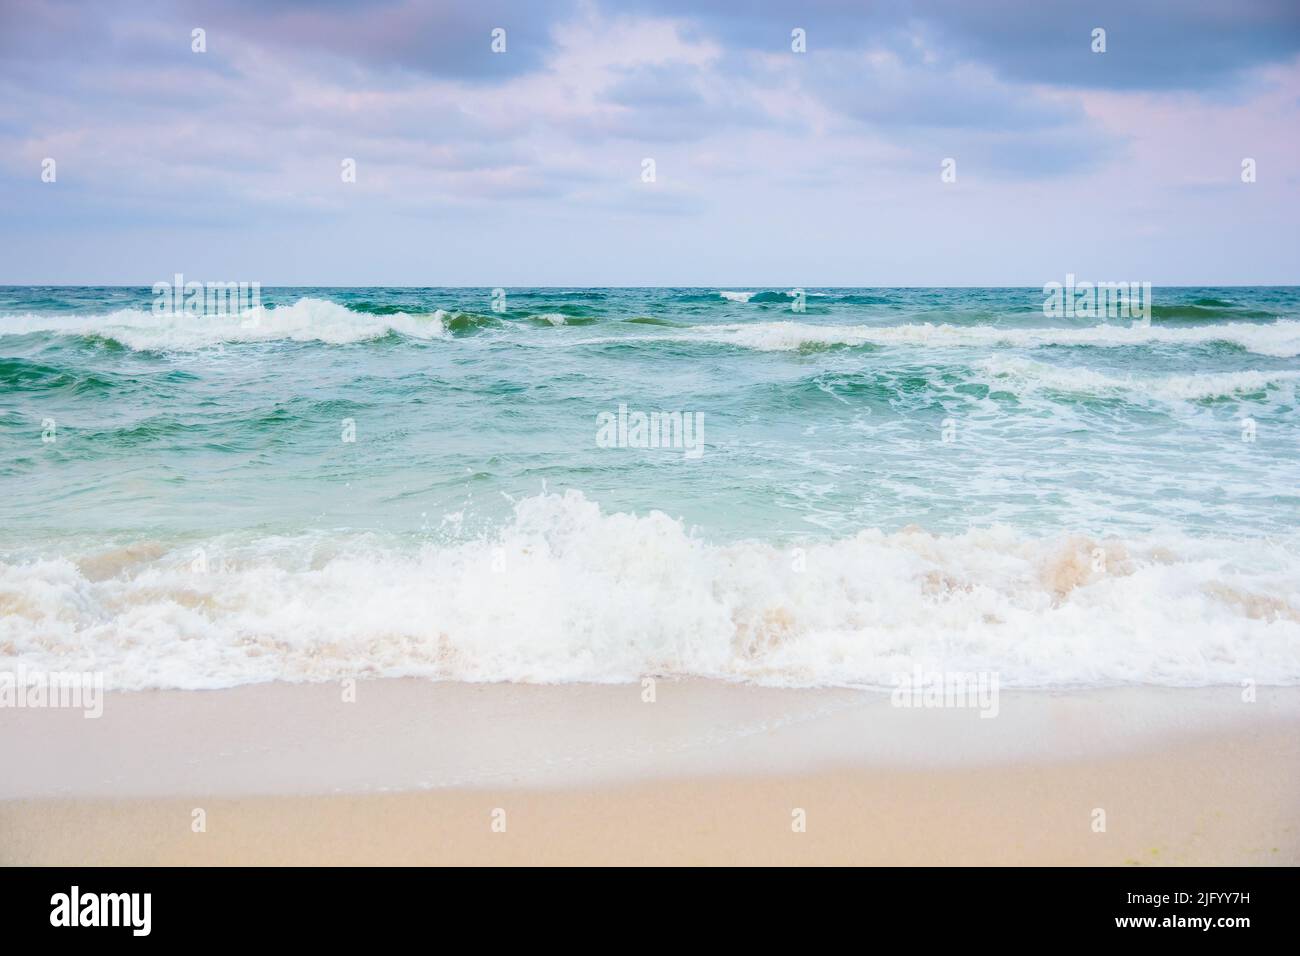 evening tide at the sea. gray clouds in colorful light. greenish waves crashing sandy beach. windy weather Stock Photo